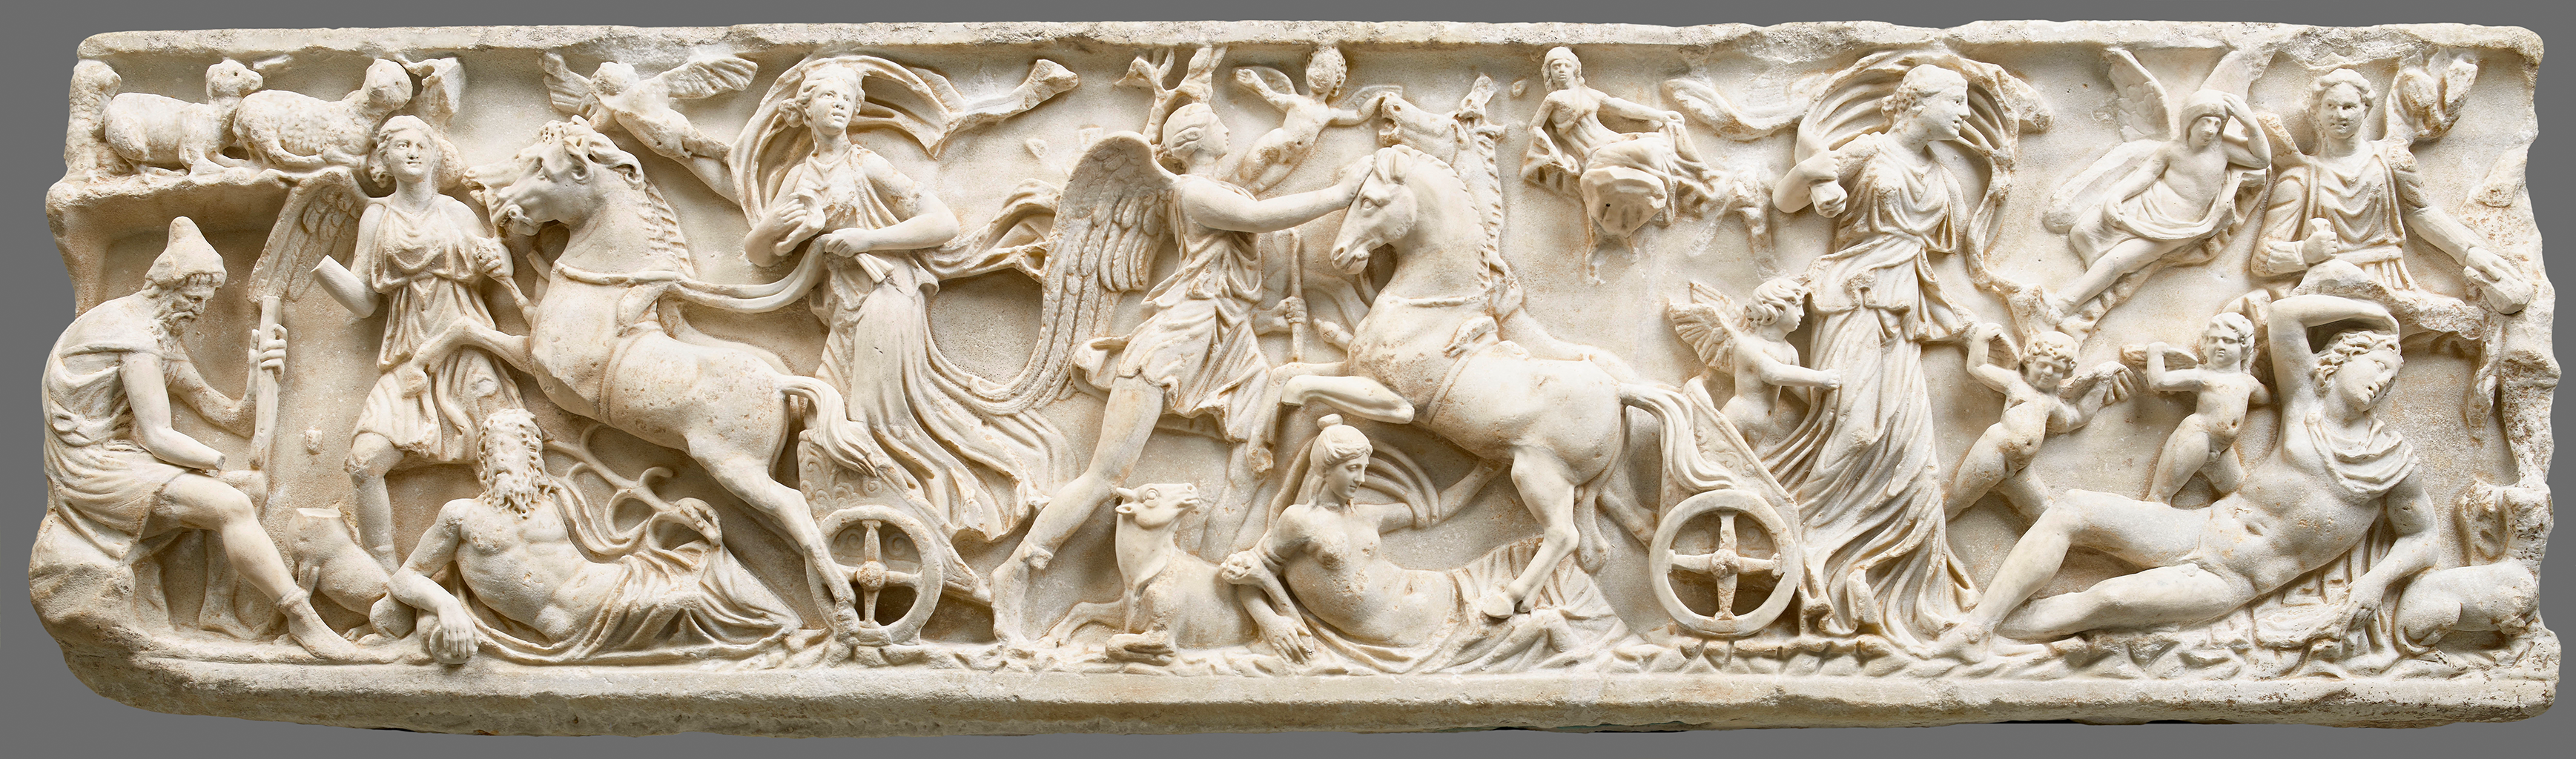 A marble sculpture depicting many mythological creatures and horses with chariots riding through the chaotic scene.